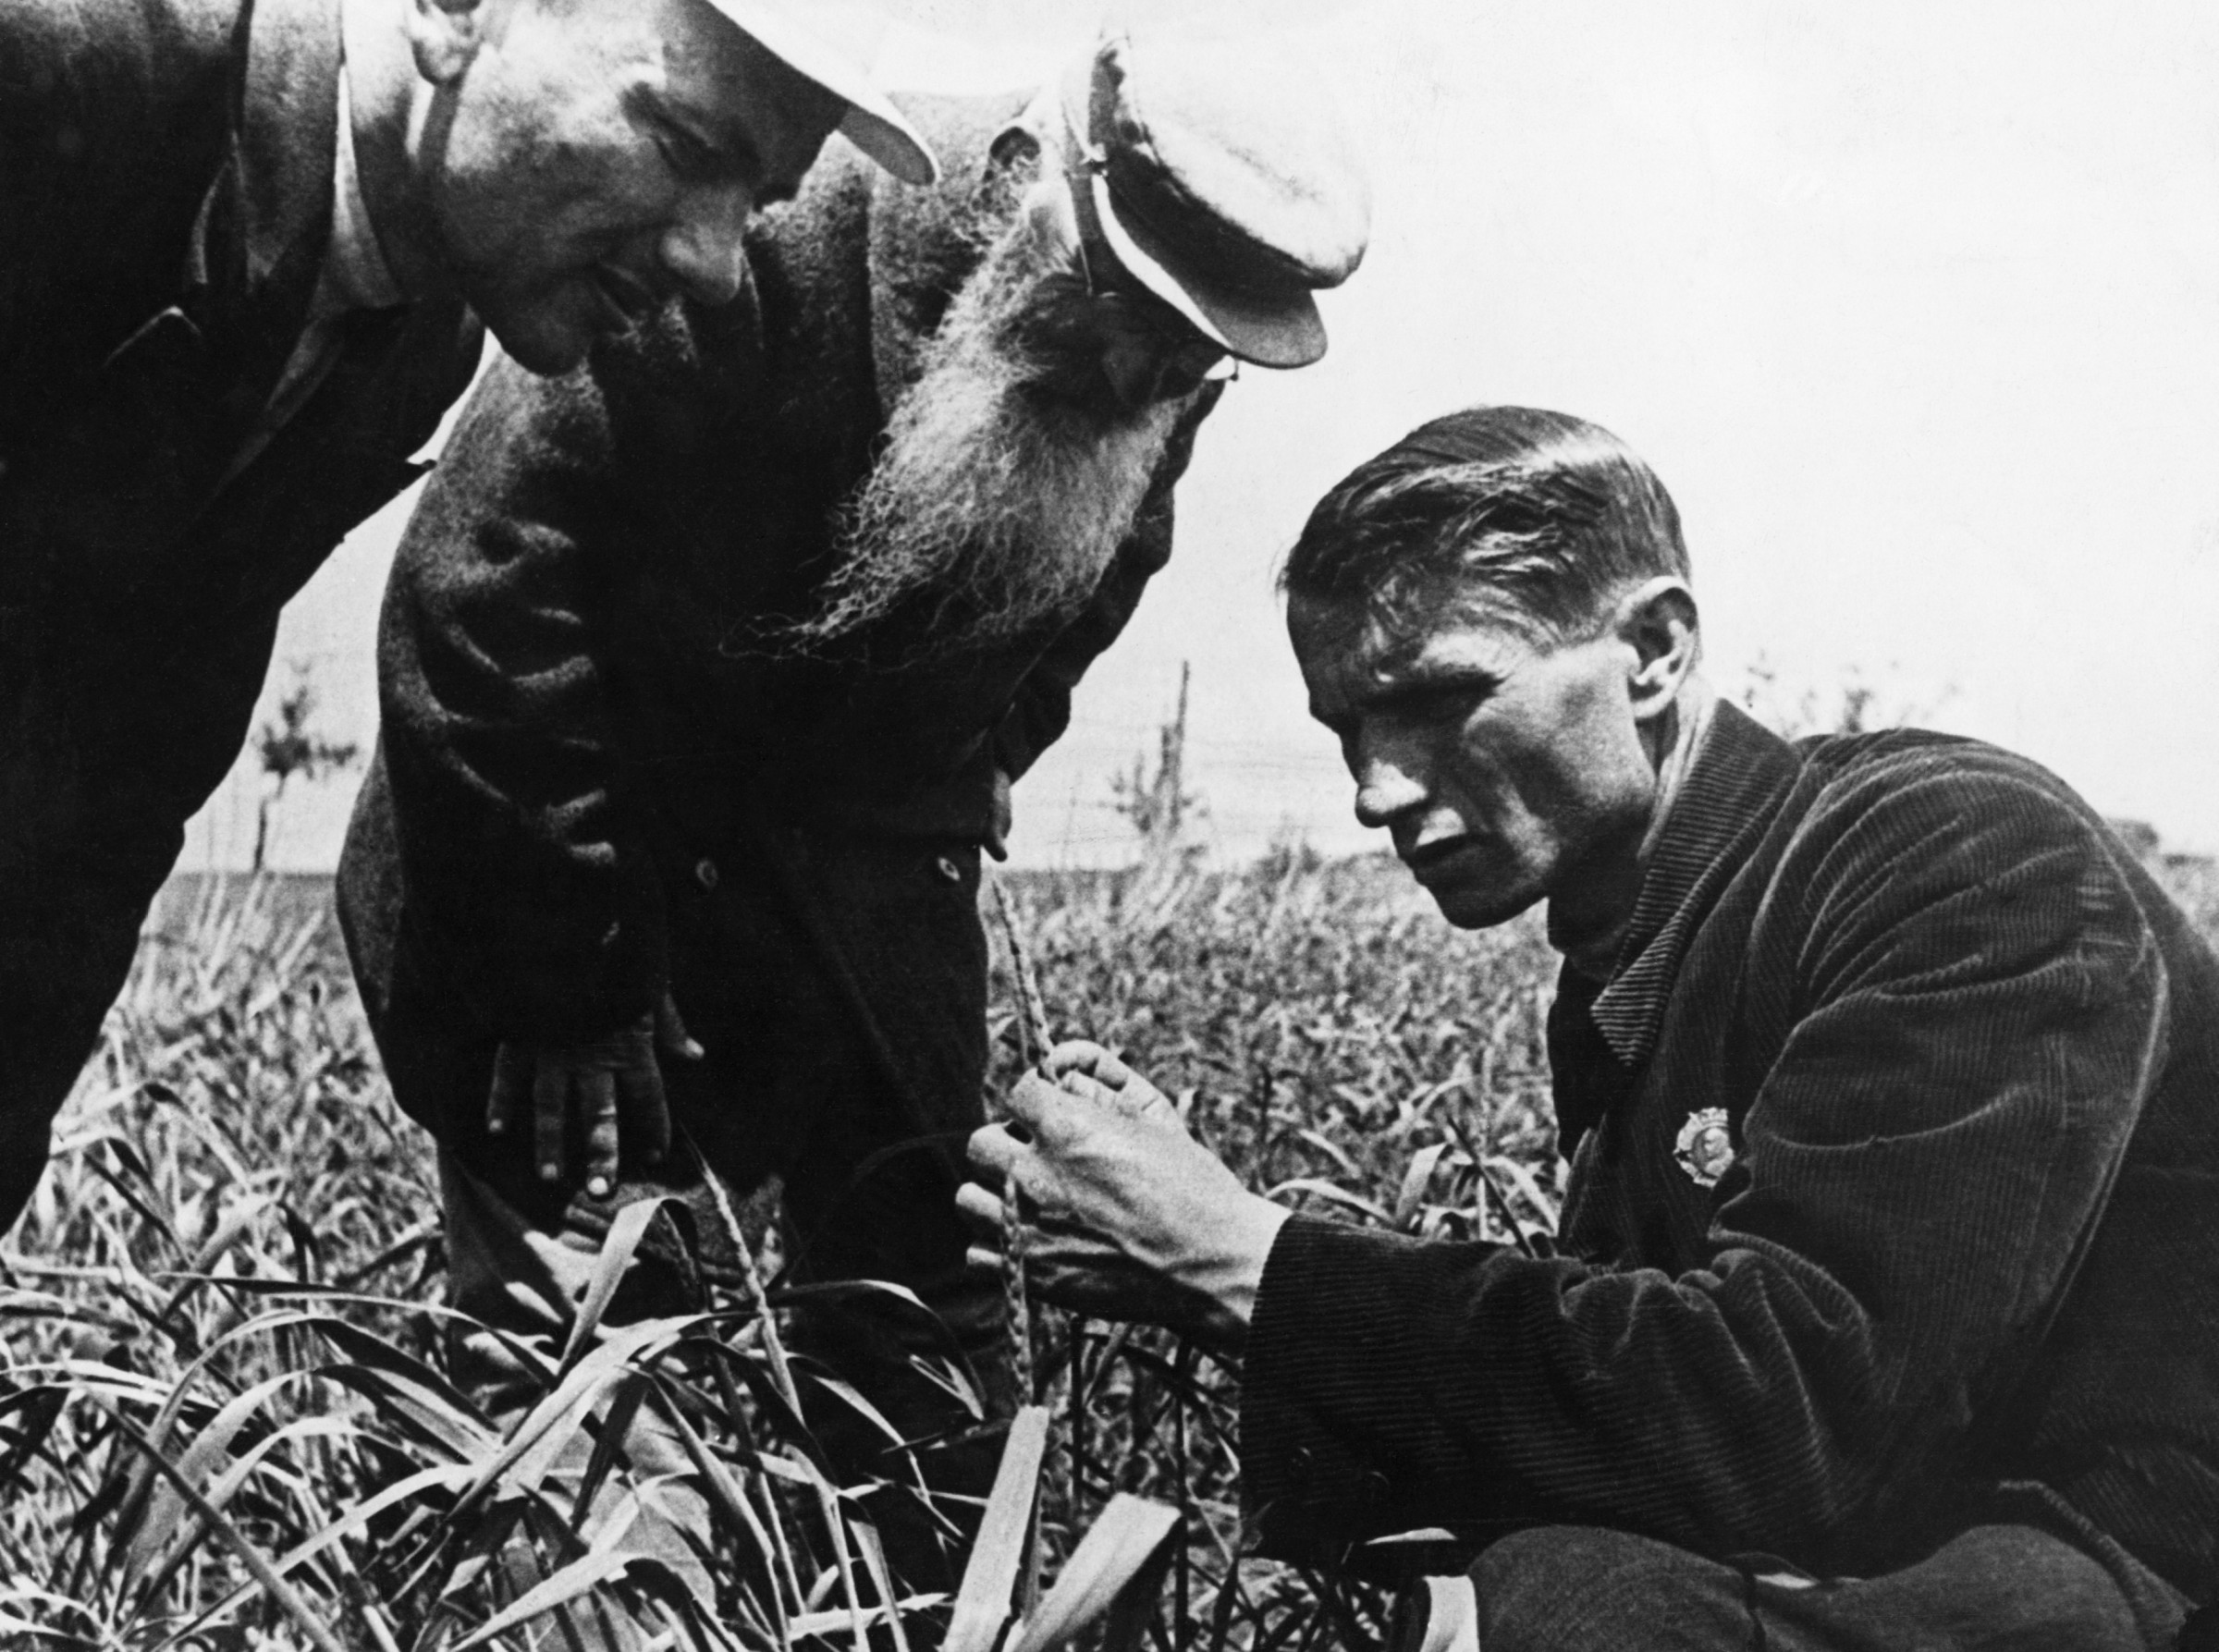 ca. 1934-1967 --- Soviet geneticist and agronomist, the President of the Lenin Academy of Agricultural Sciences, Trofim Lysenko measures the growth of wheat in a collective farm field near Odessa in the Ukraine. | Location: Odessa, USSR. --- Image by © Hulton-Deutsch Collection/CORBIS